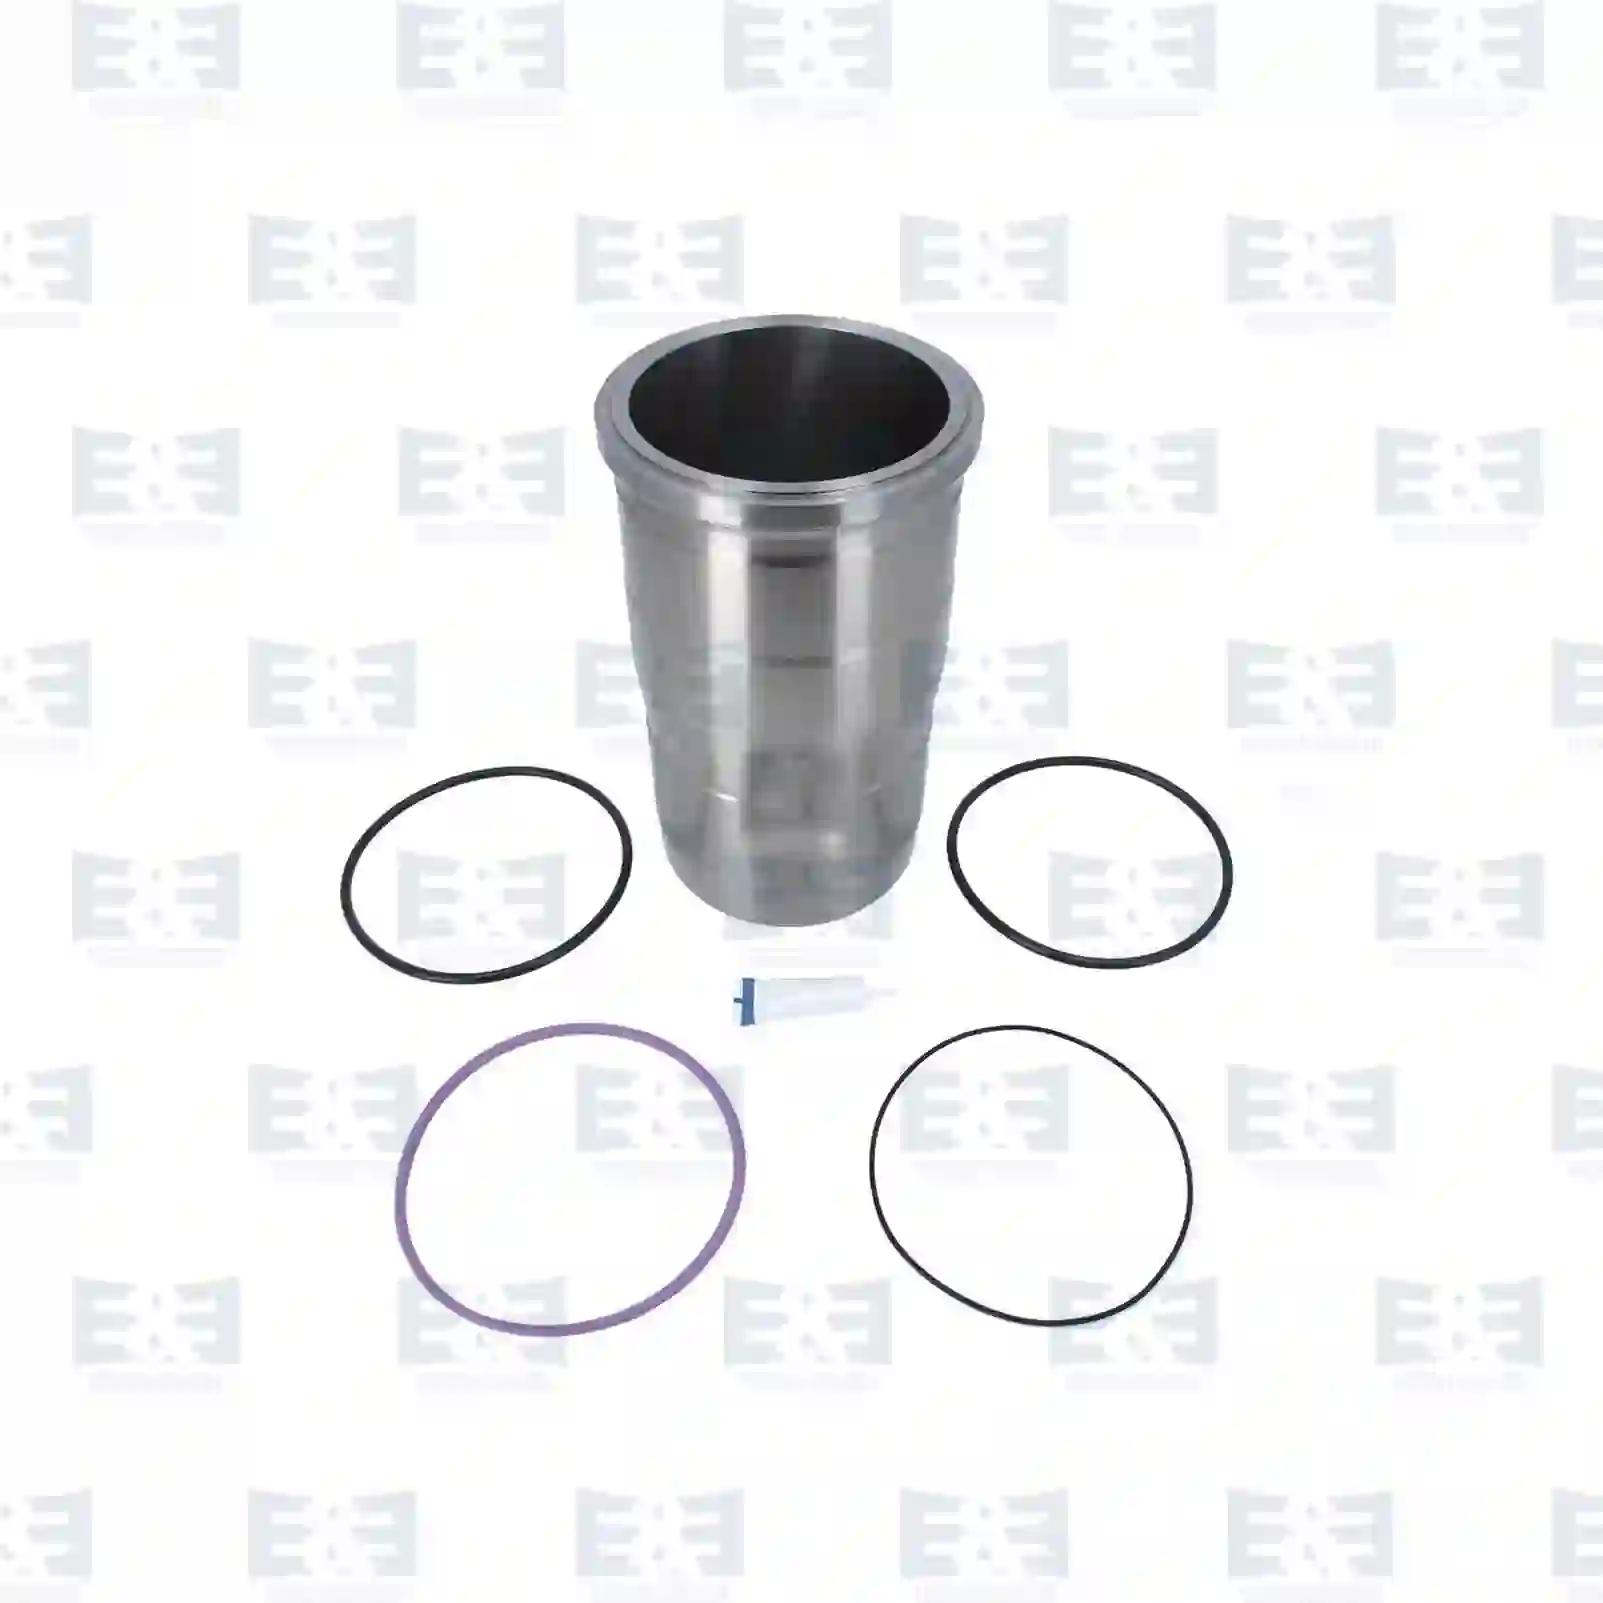 Cylinder liner, with seal rings, 2E2206770, 7421334768, 21334 ||  2E2206770 E&E Truck Spare Parts | Truck Spare Parts, Auotomotive Spare Parts Cylinder liner, with seal rings, 2E2206770, 7421334768, 21334 ||  2E2206770 E&E Truck Spare Parts | Truck Spare Parts, Auotomotive Spare Parts